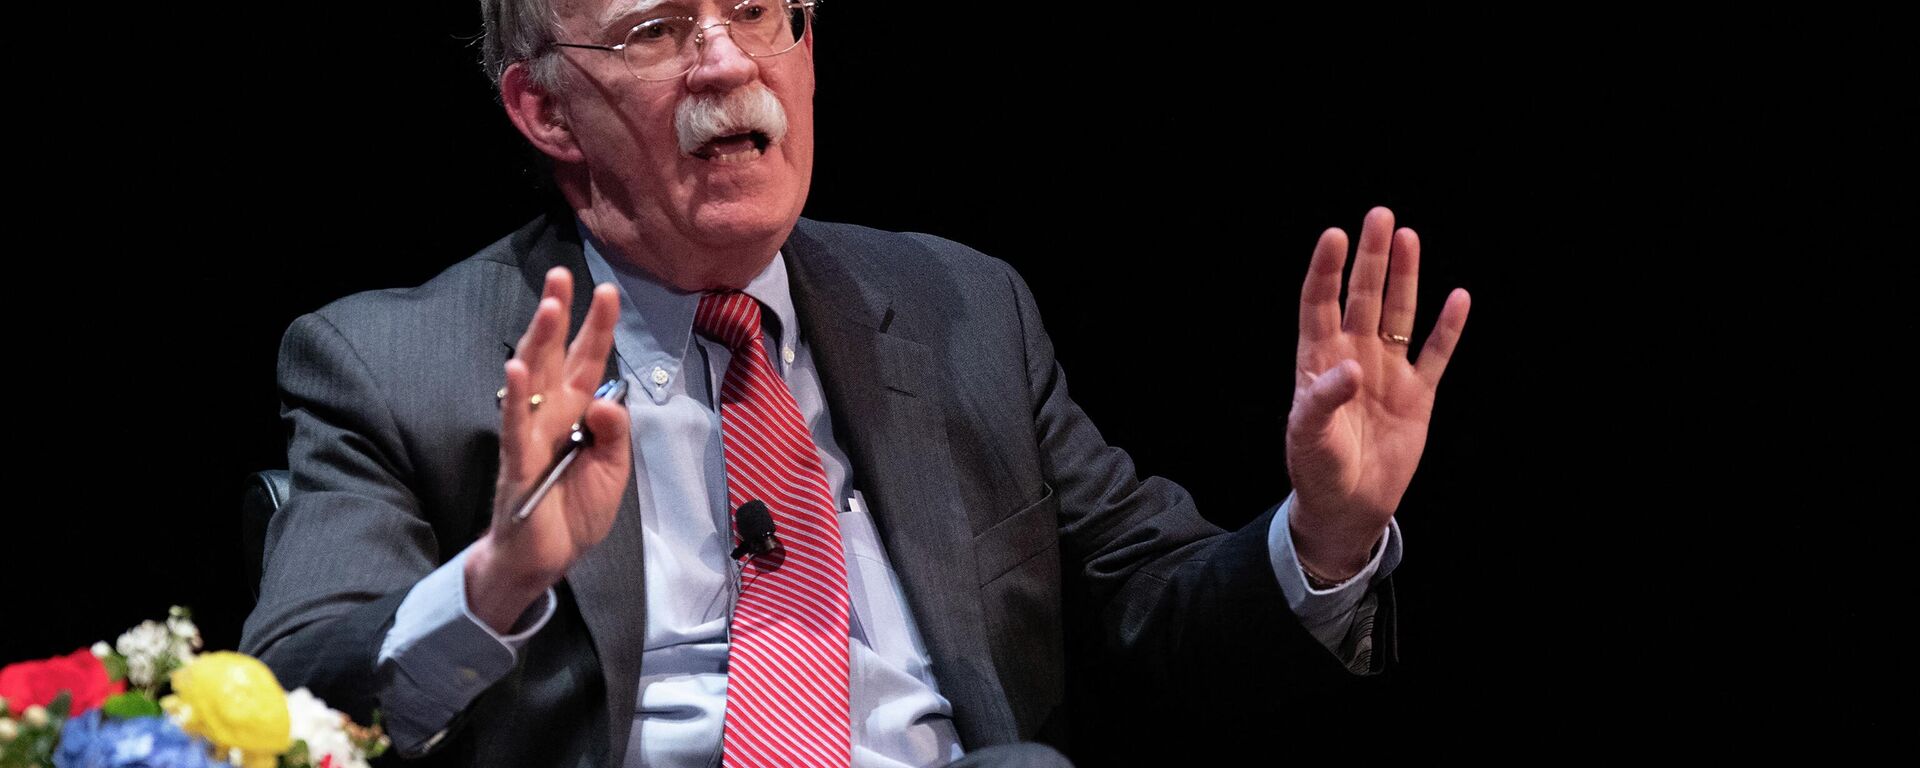  In this file photo taken on February 17, 2020, former National Security adviser John Bolton speaks on stage during a public discussion at Duke University in Durham, North Carolina - Sputnik International, 1920, 11.08.2022